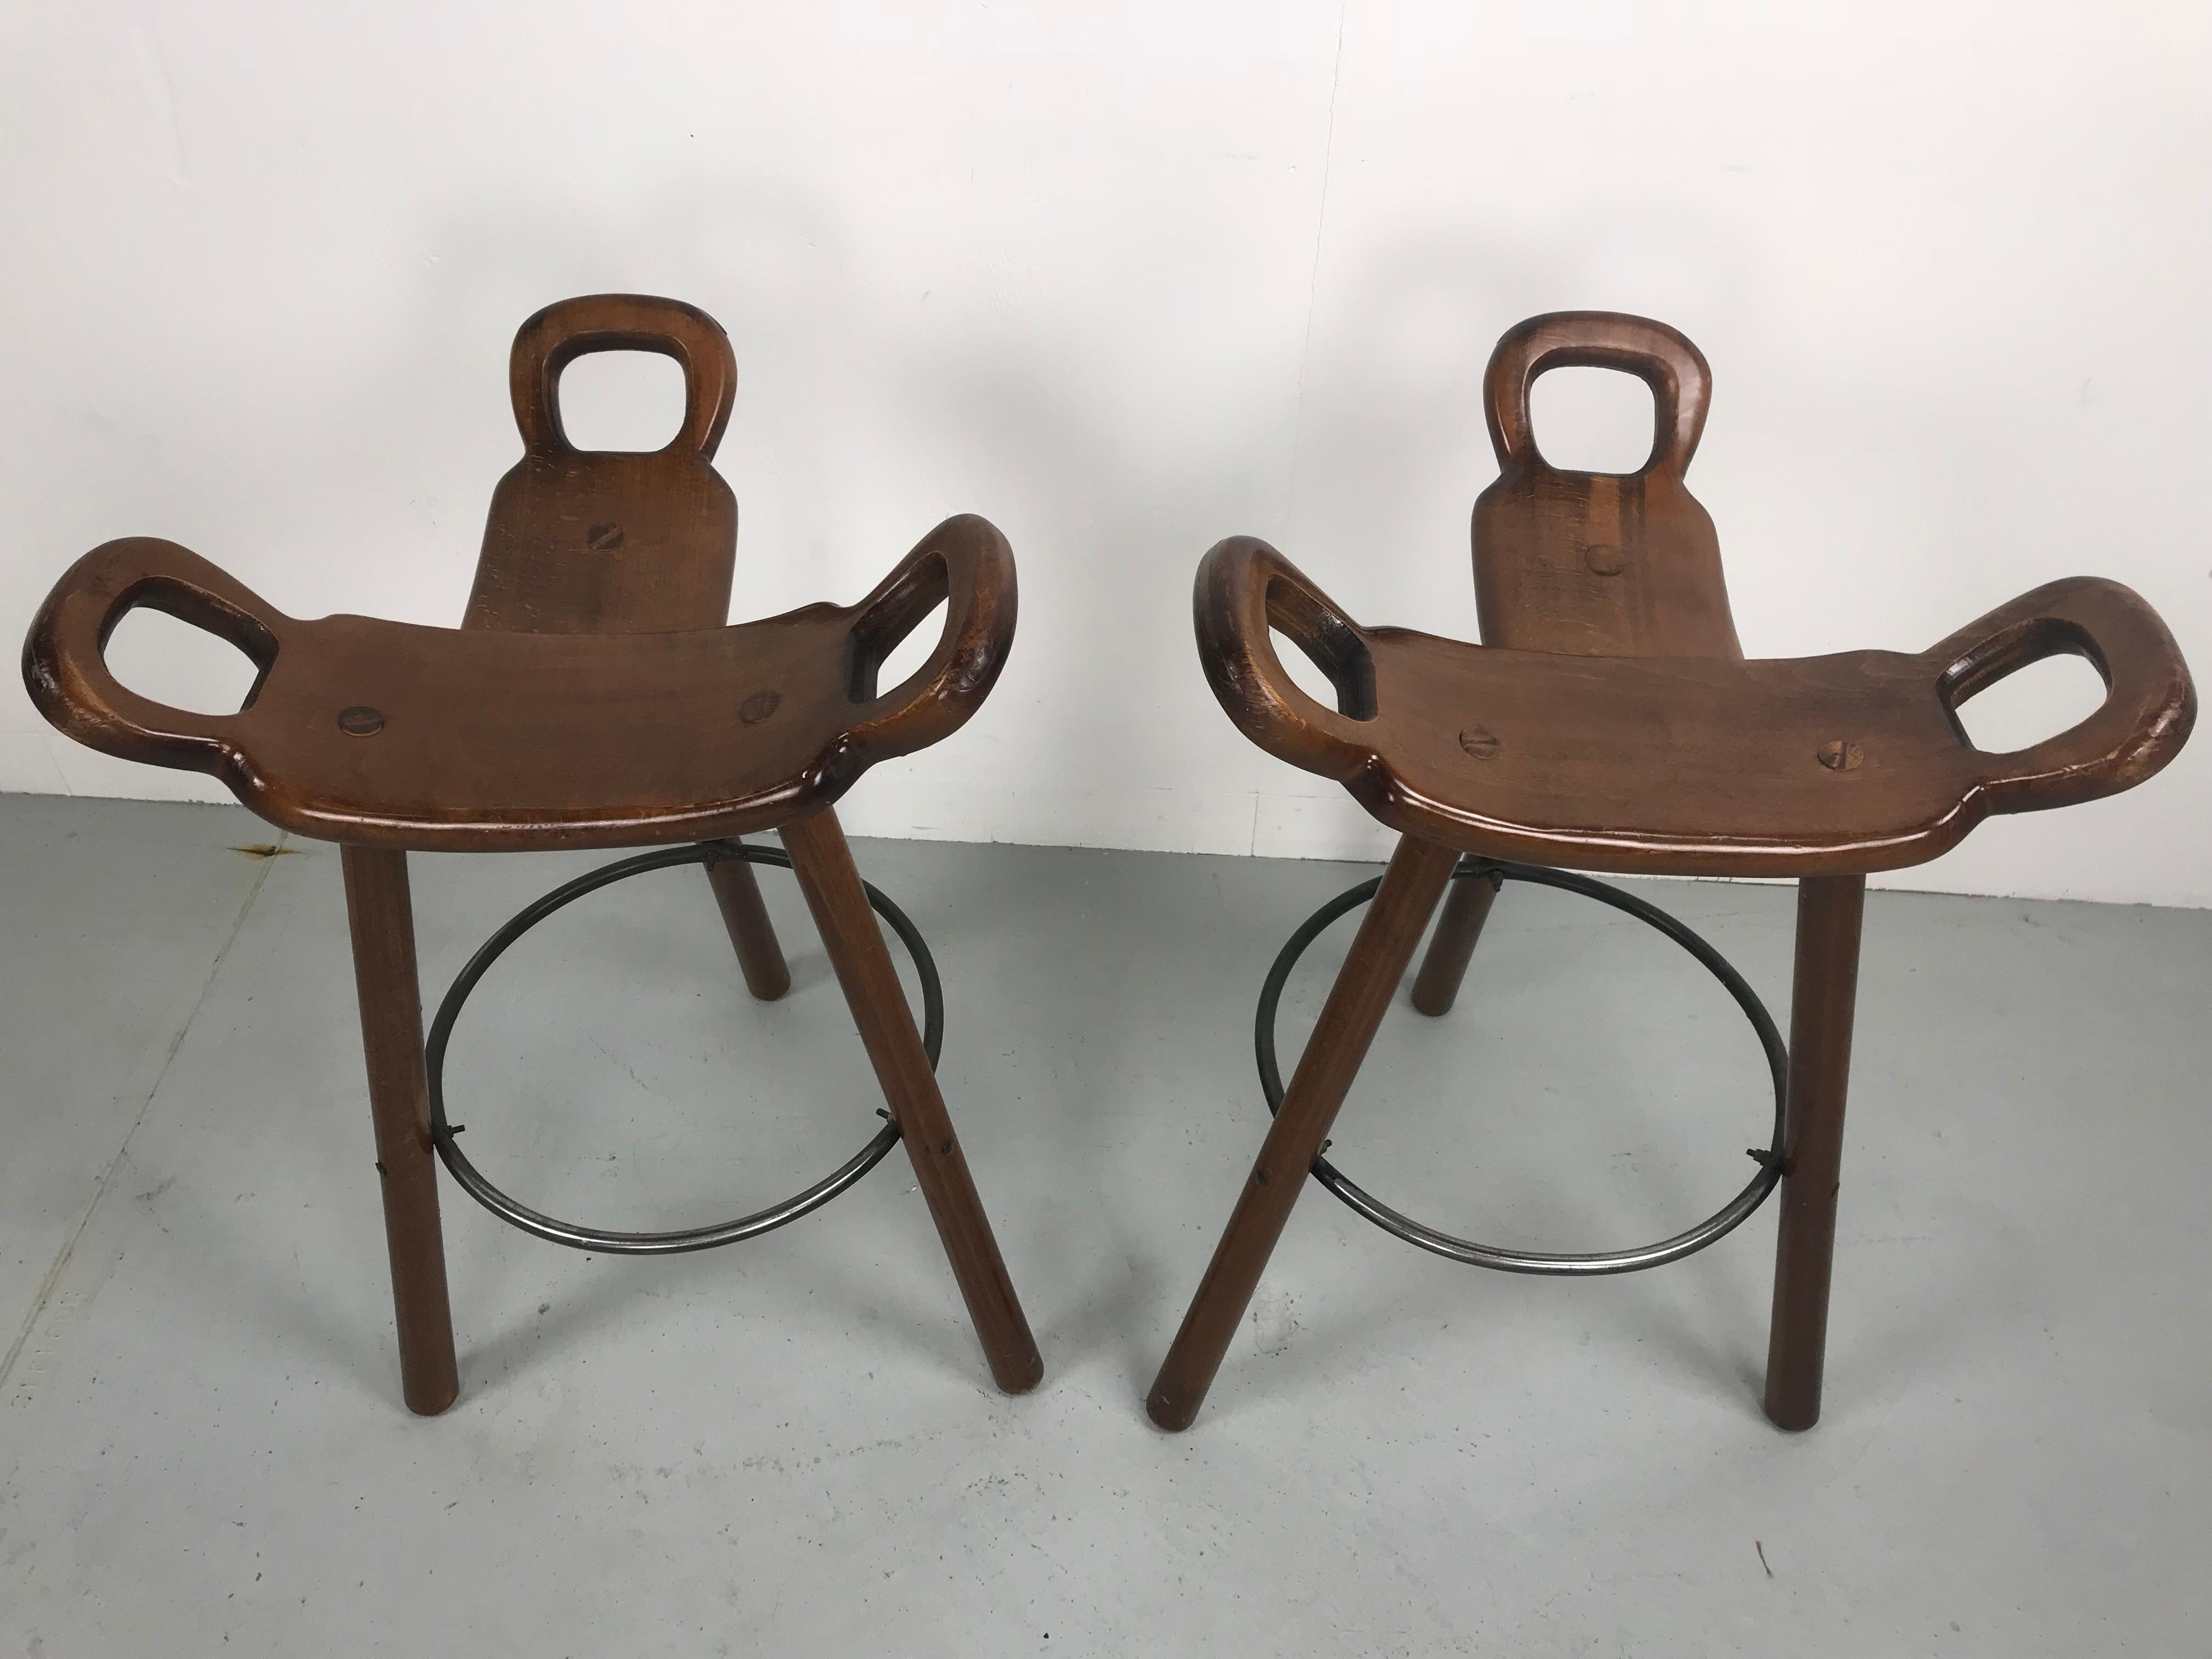 Set of two 'Brutalist' or 'Marbella' bar stools, in brown oakwood and metal, Spain, 1970s. 

Set of two Brutalist bar stools in brown stained colour. The eye-catching part is the seating. A curved T-shape with three handles. The handles are not